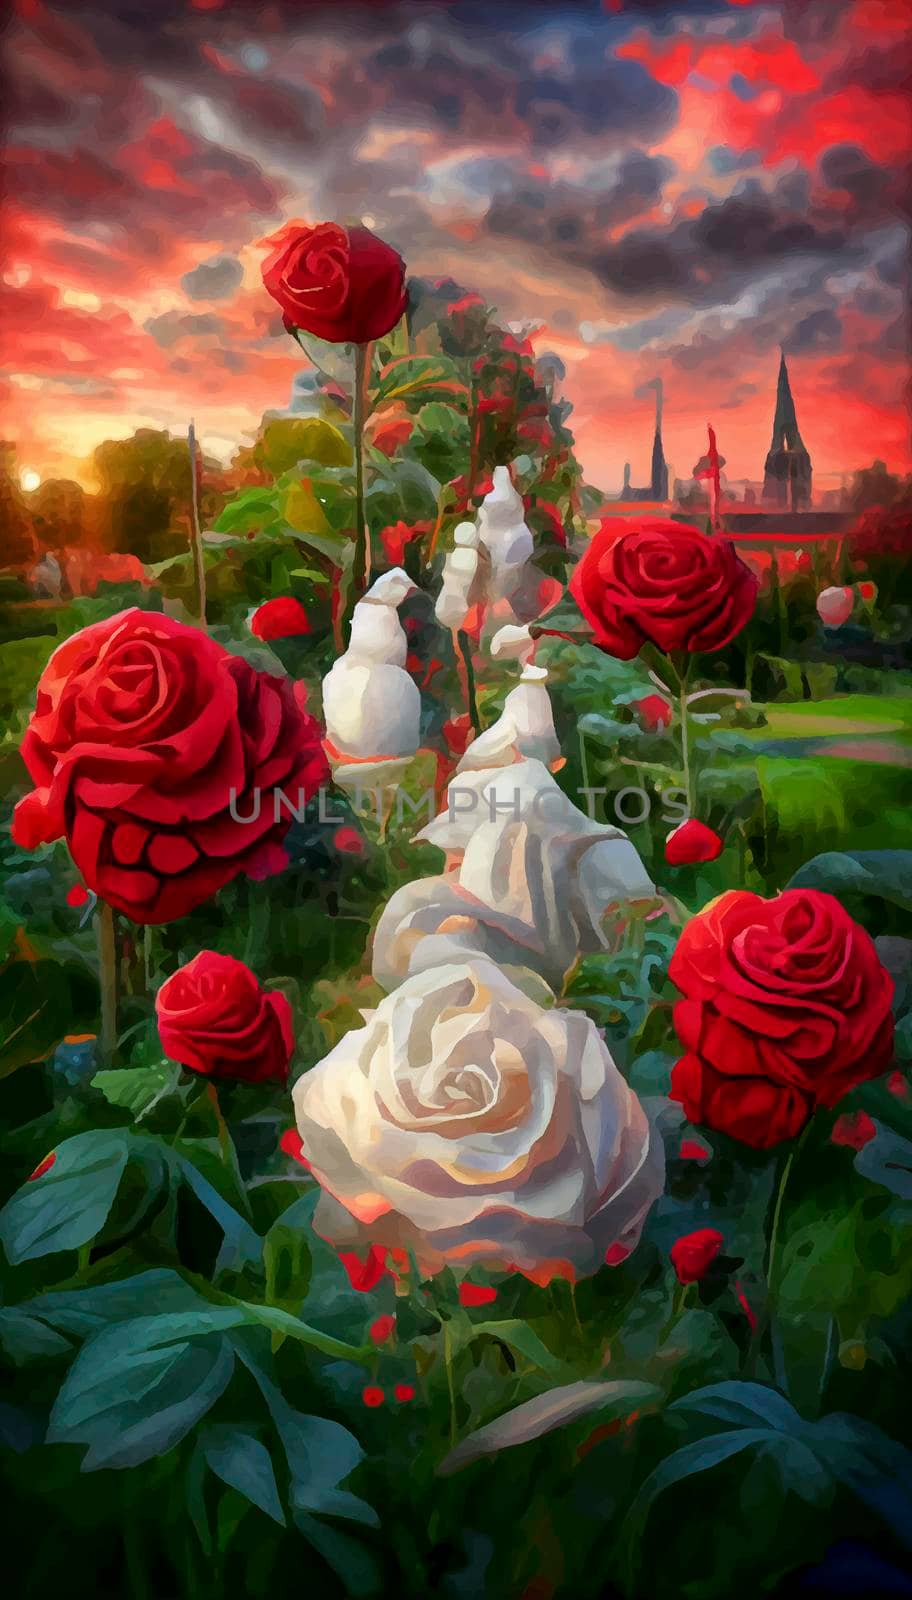 red and white roses under the colorful sky. roses with castle and sunset in the background by JpRamos